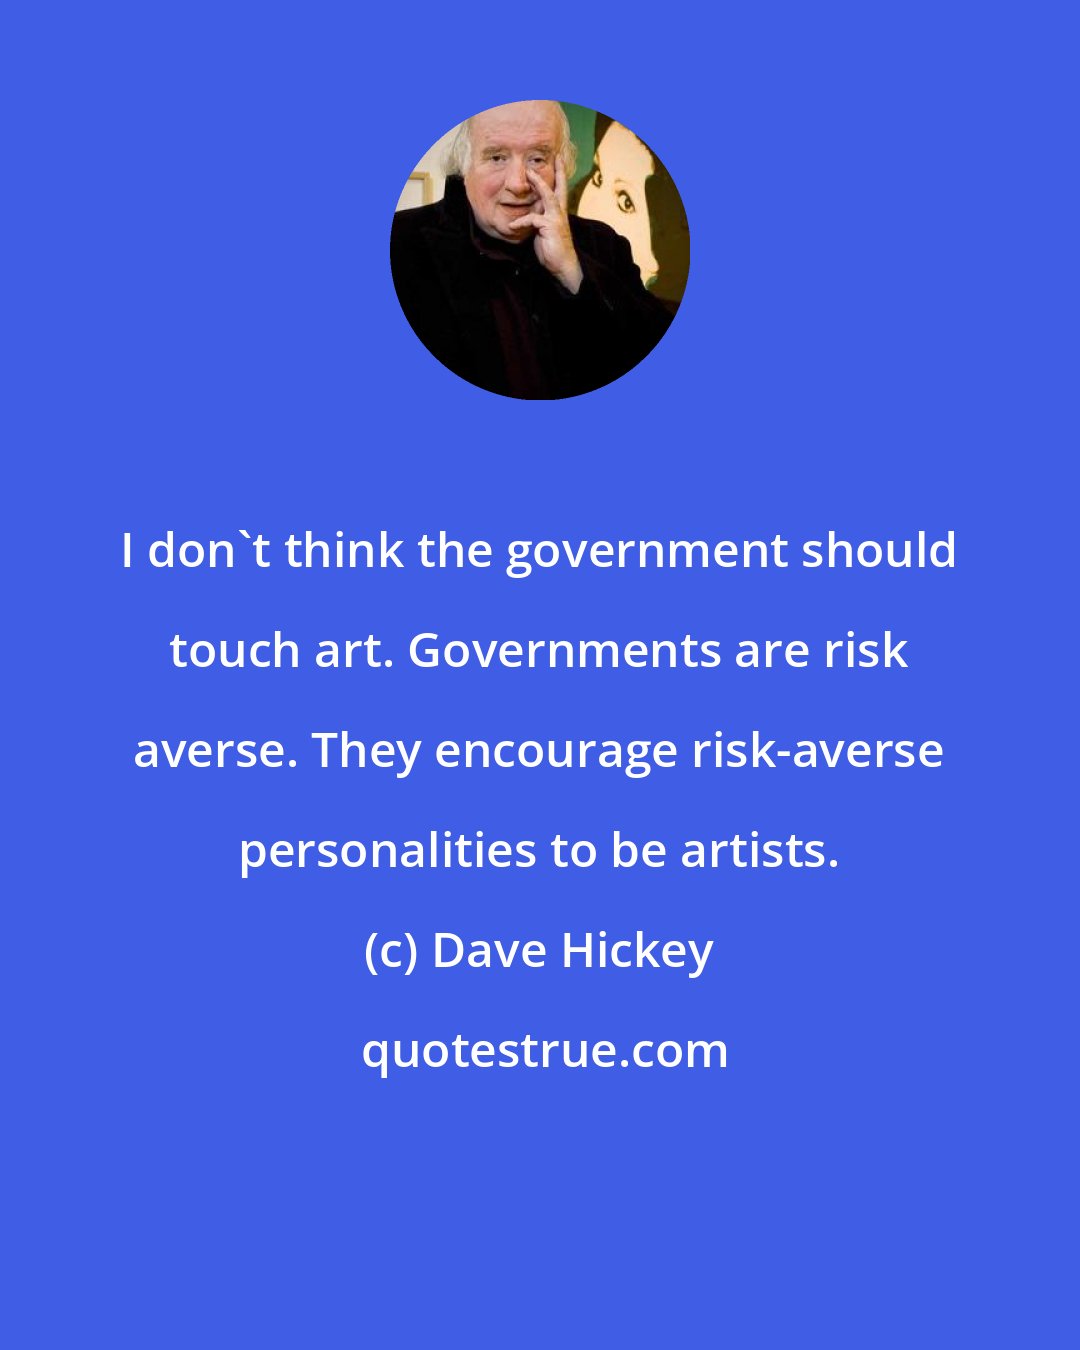 Dave Hickey: I don't think the government should touch art. Governments are risk averse. They encourage risk-averse personalities to be artists.